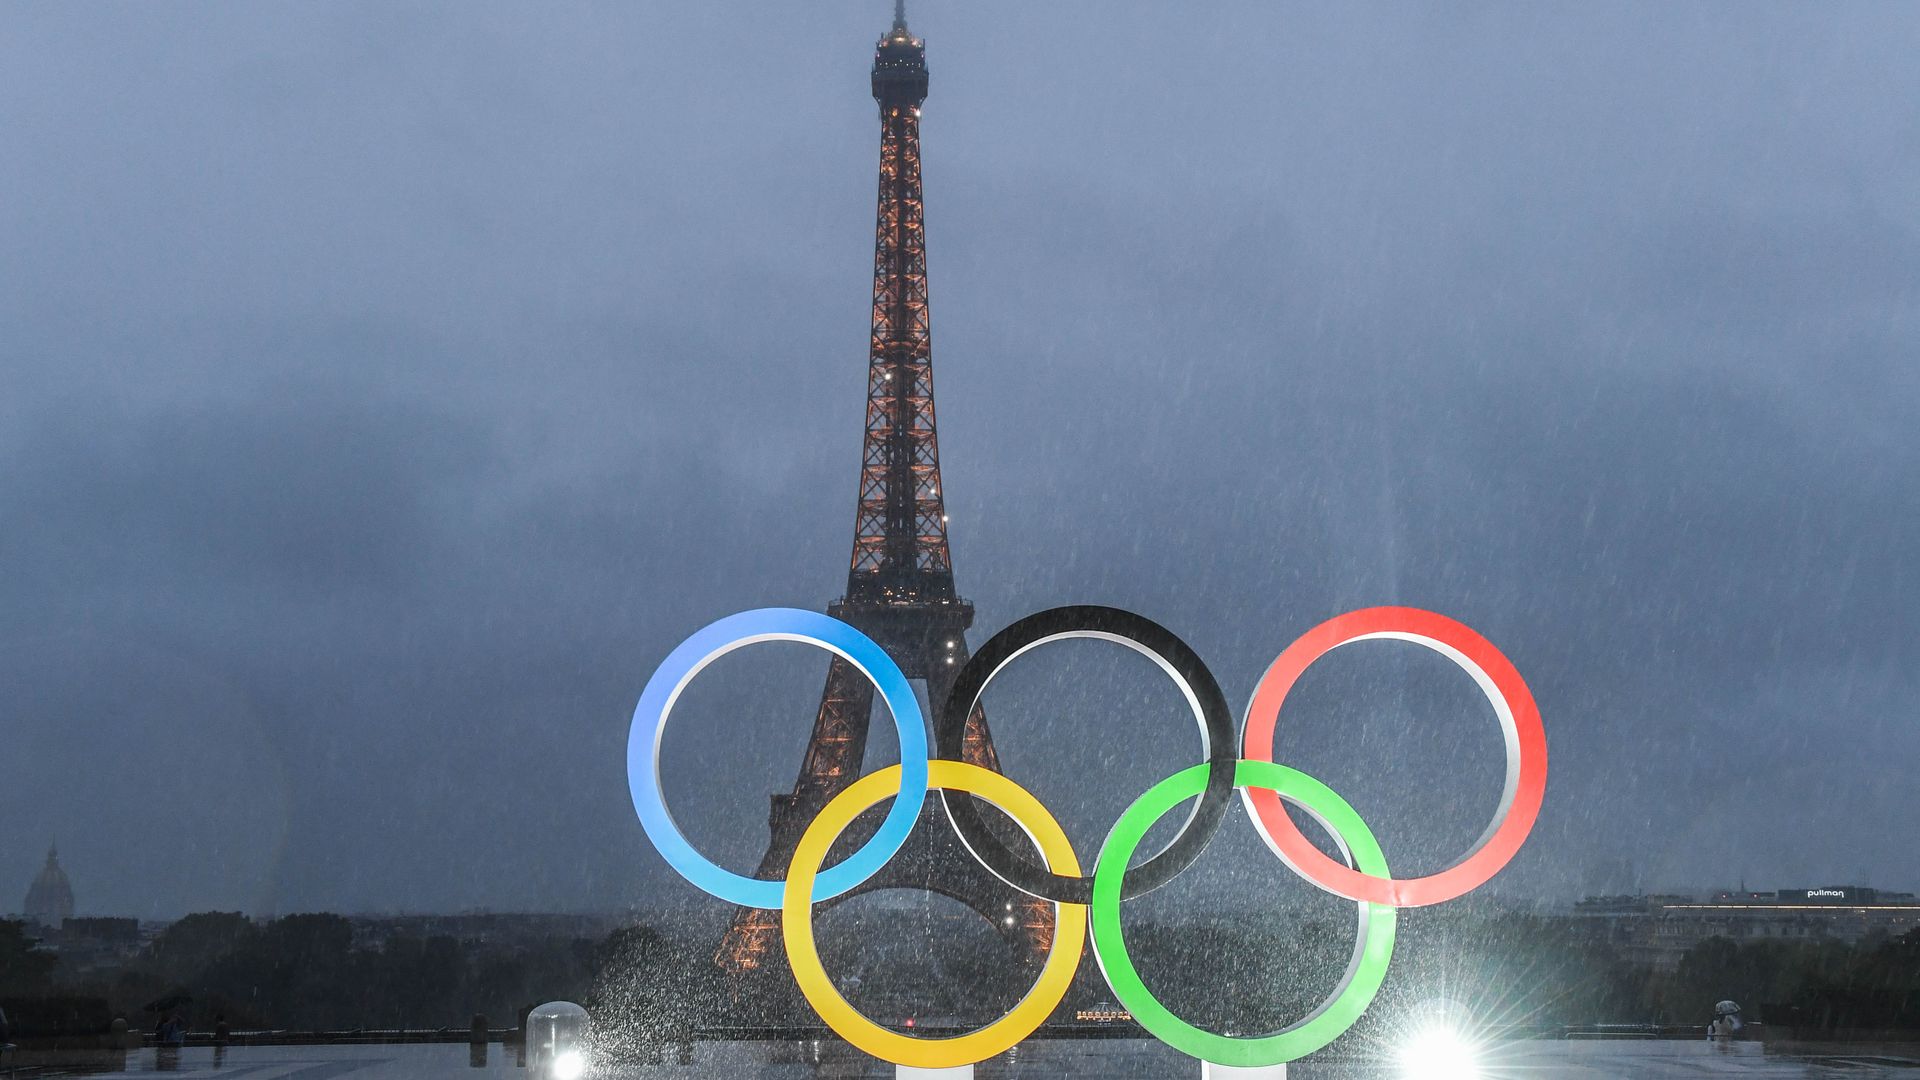 NBCU Sees Early Strength In Paris 2024 Olympic Advertising Sales | Next TV